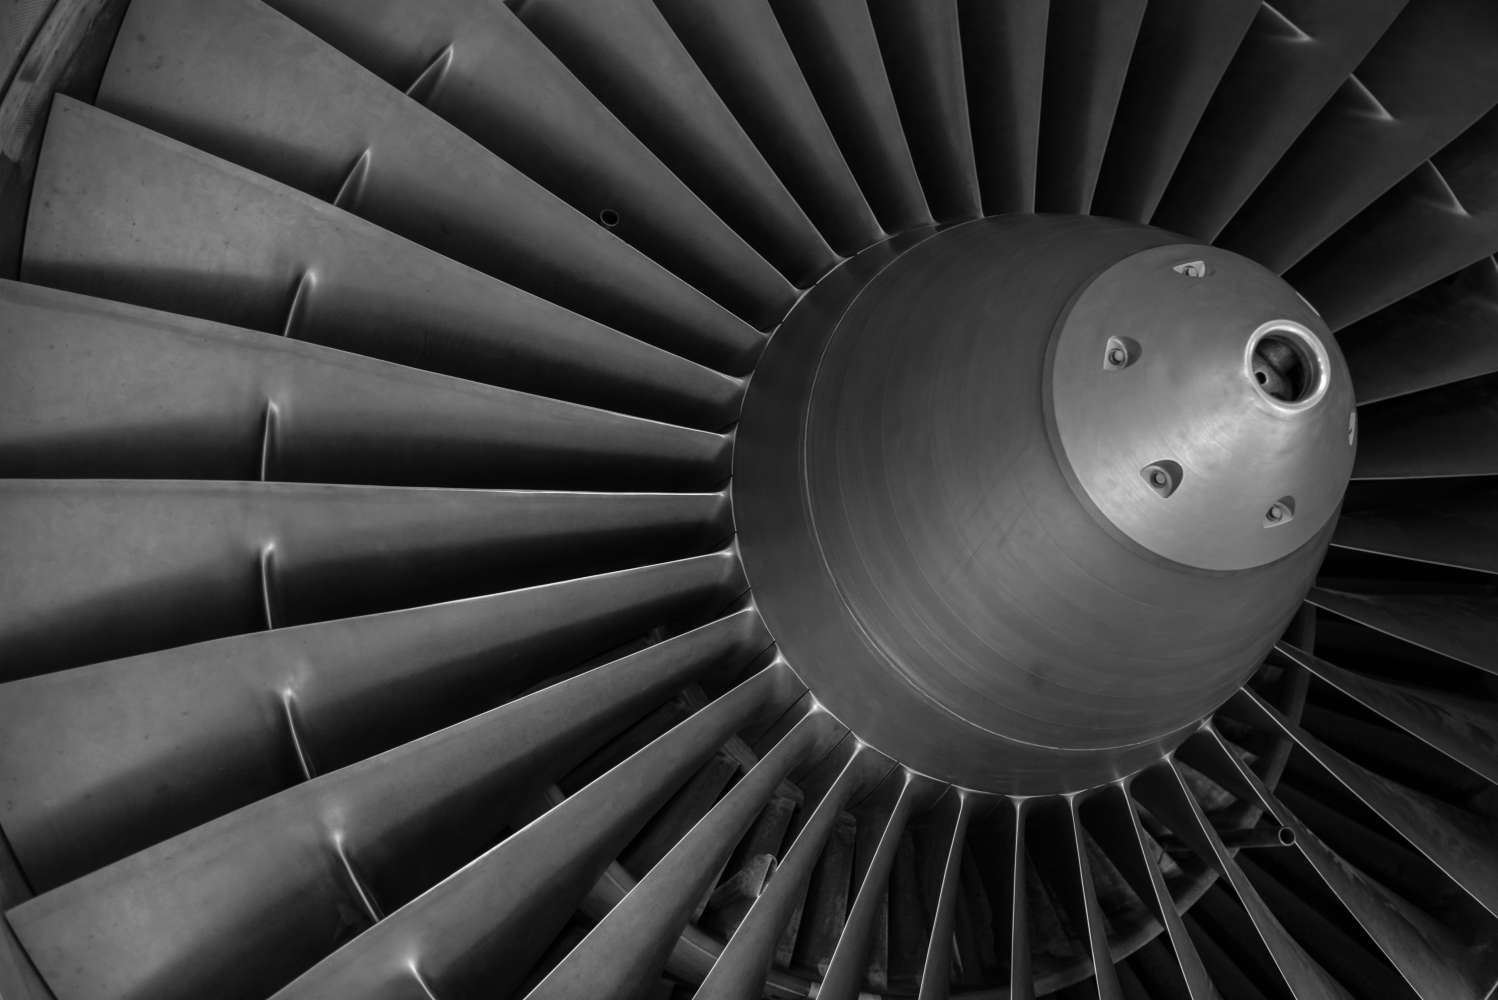 Hastelloy, Inconel, Nimonic, Waspaloy...do you know that superalloys? Are the superalloys used in aircraft industry really super?